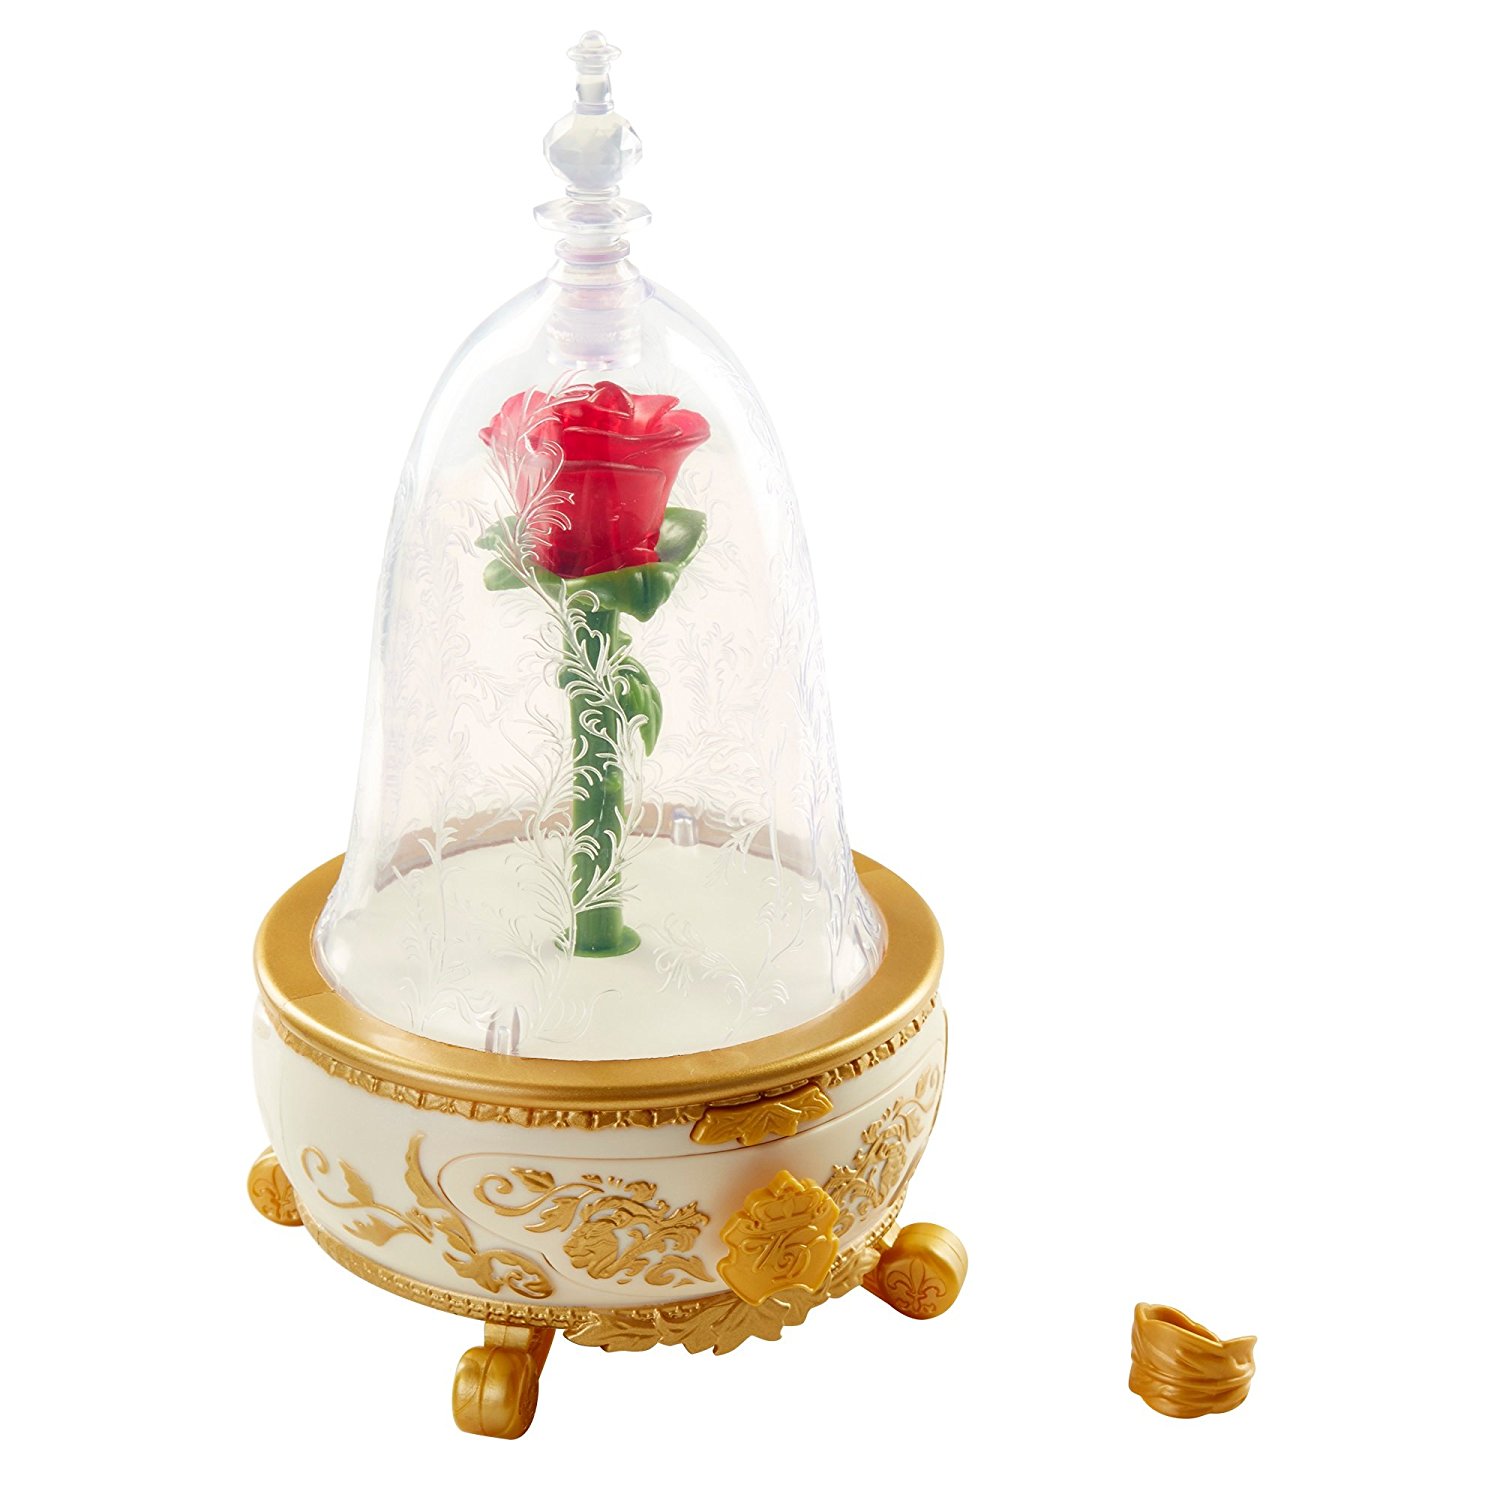 Disney’s Beauty & the Beast Live Action Enchanted Rose Jewelry Box Toy